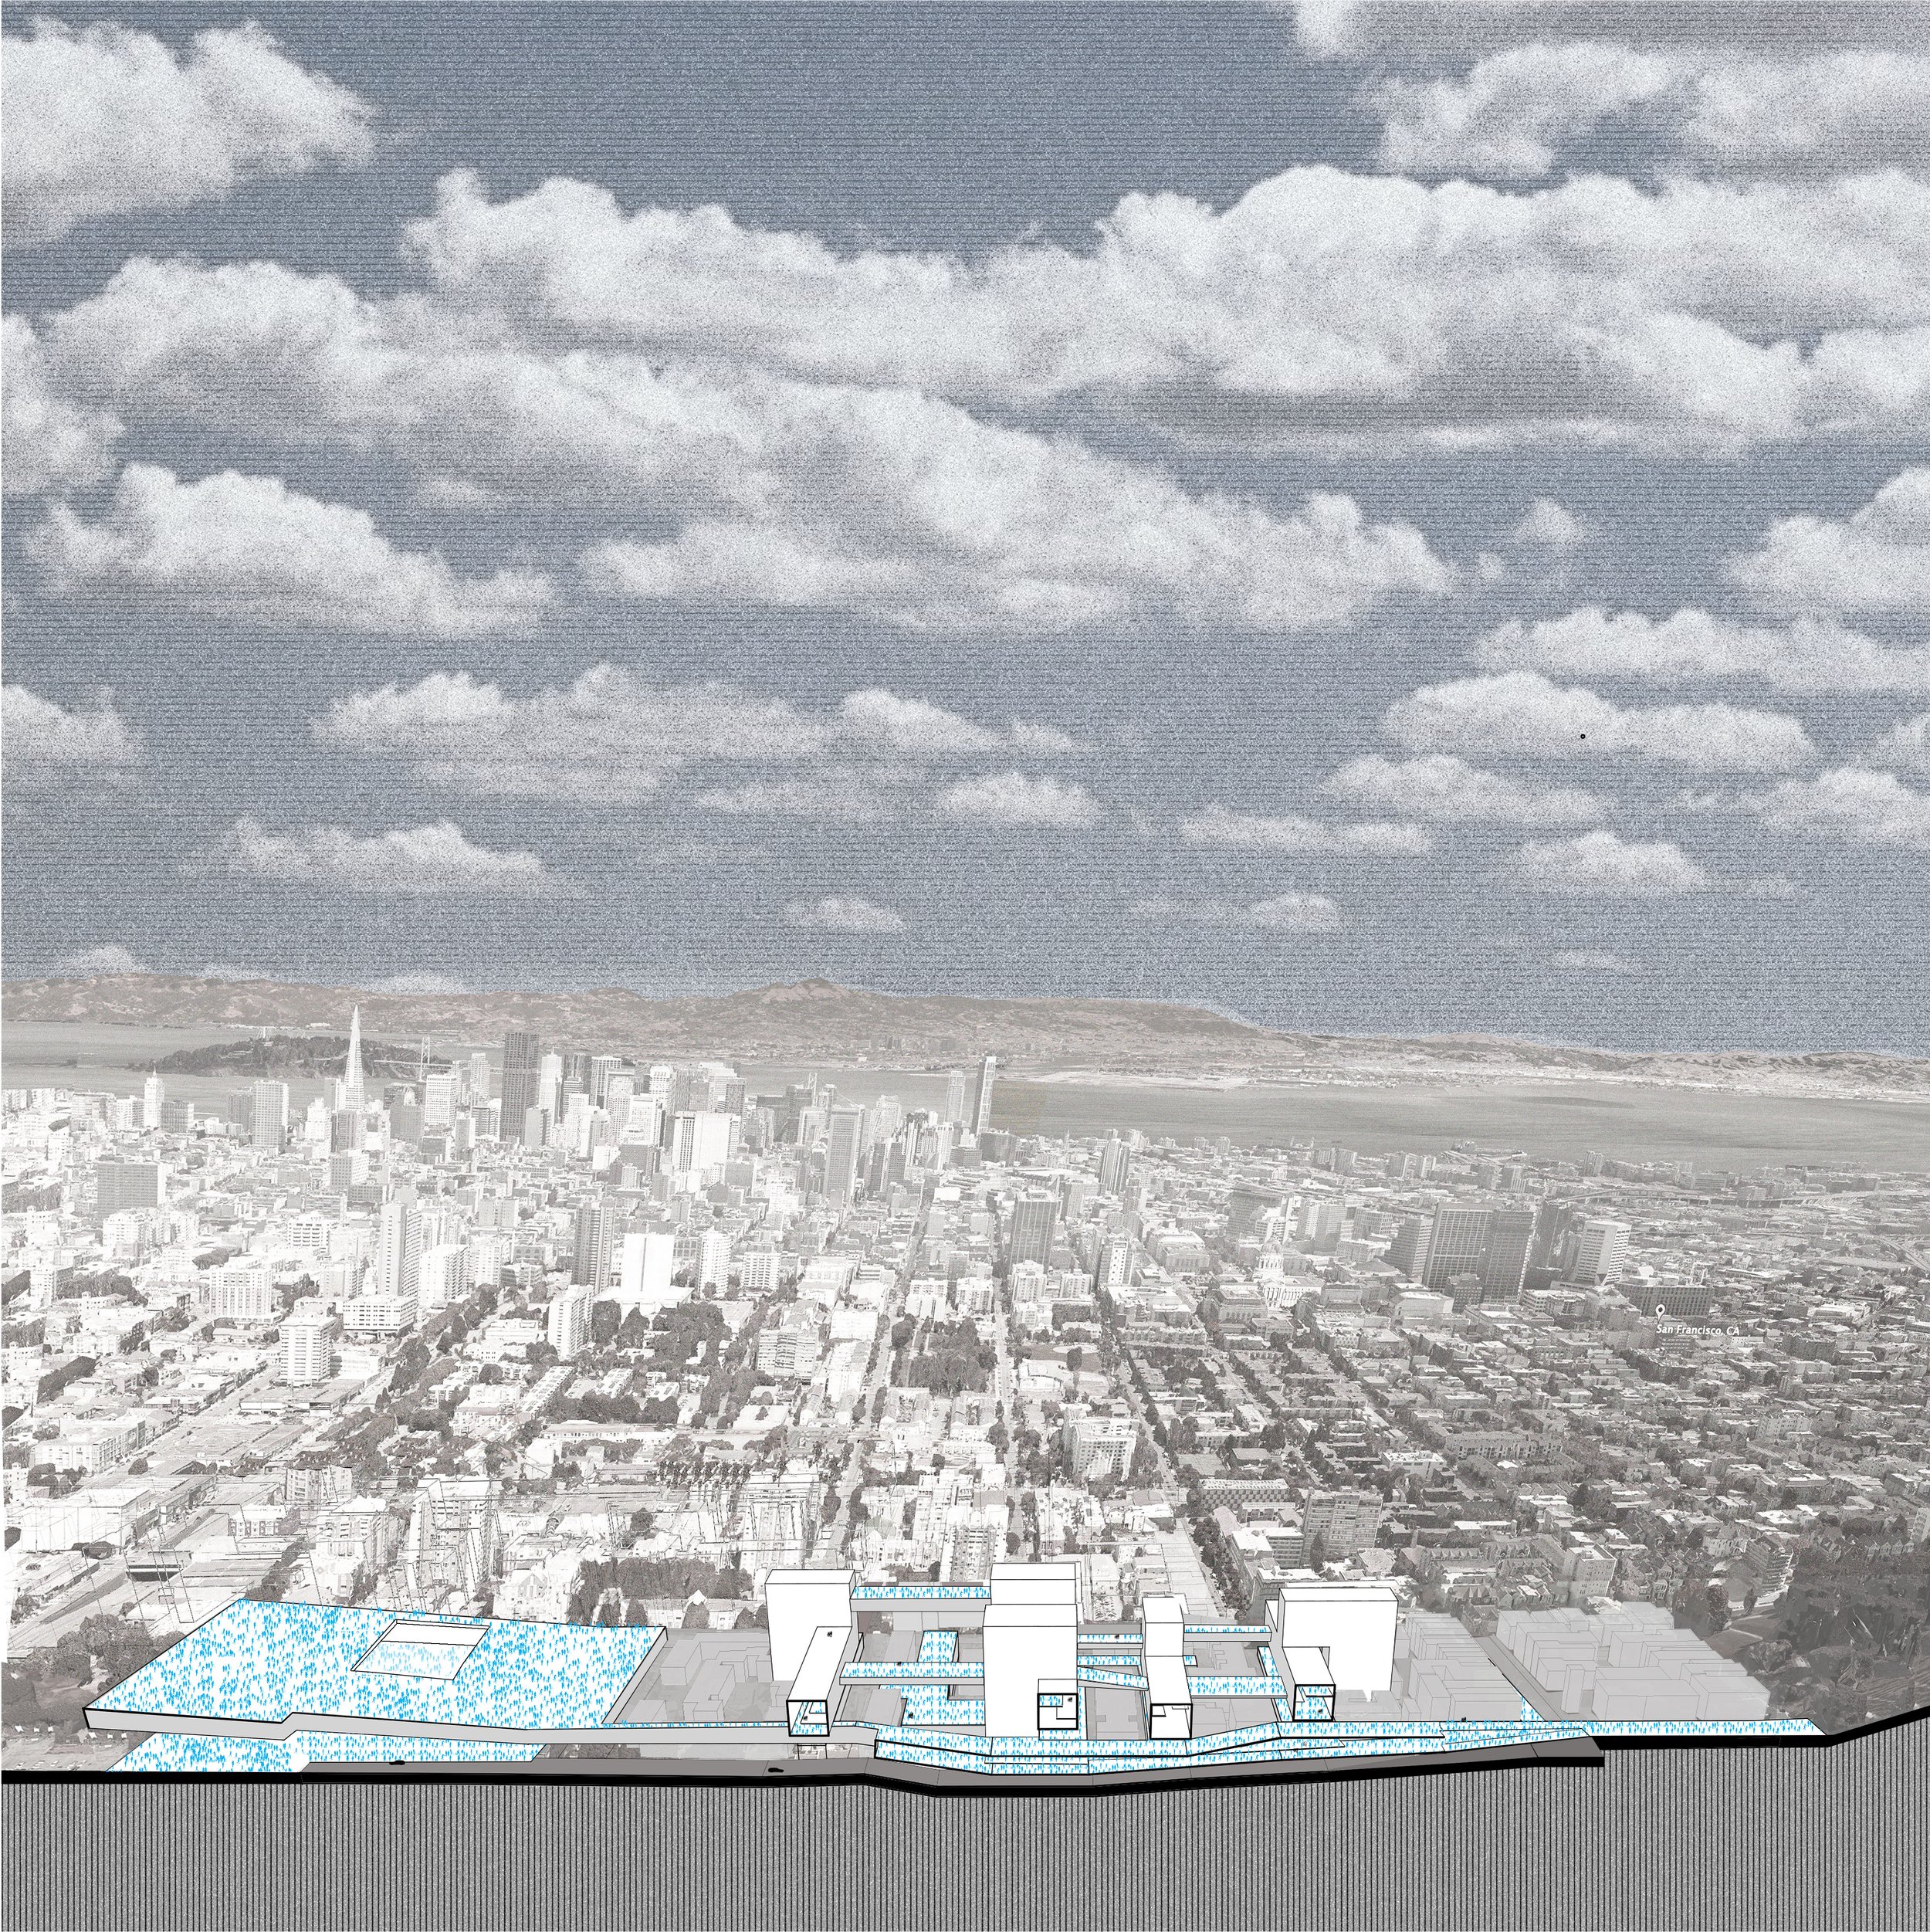 Horizontalism, Lateral Density for the next 100,000 in SF. 2015.